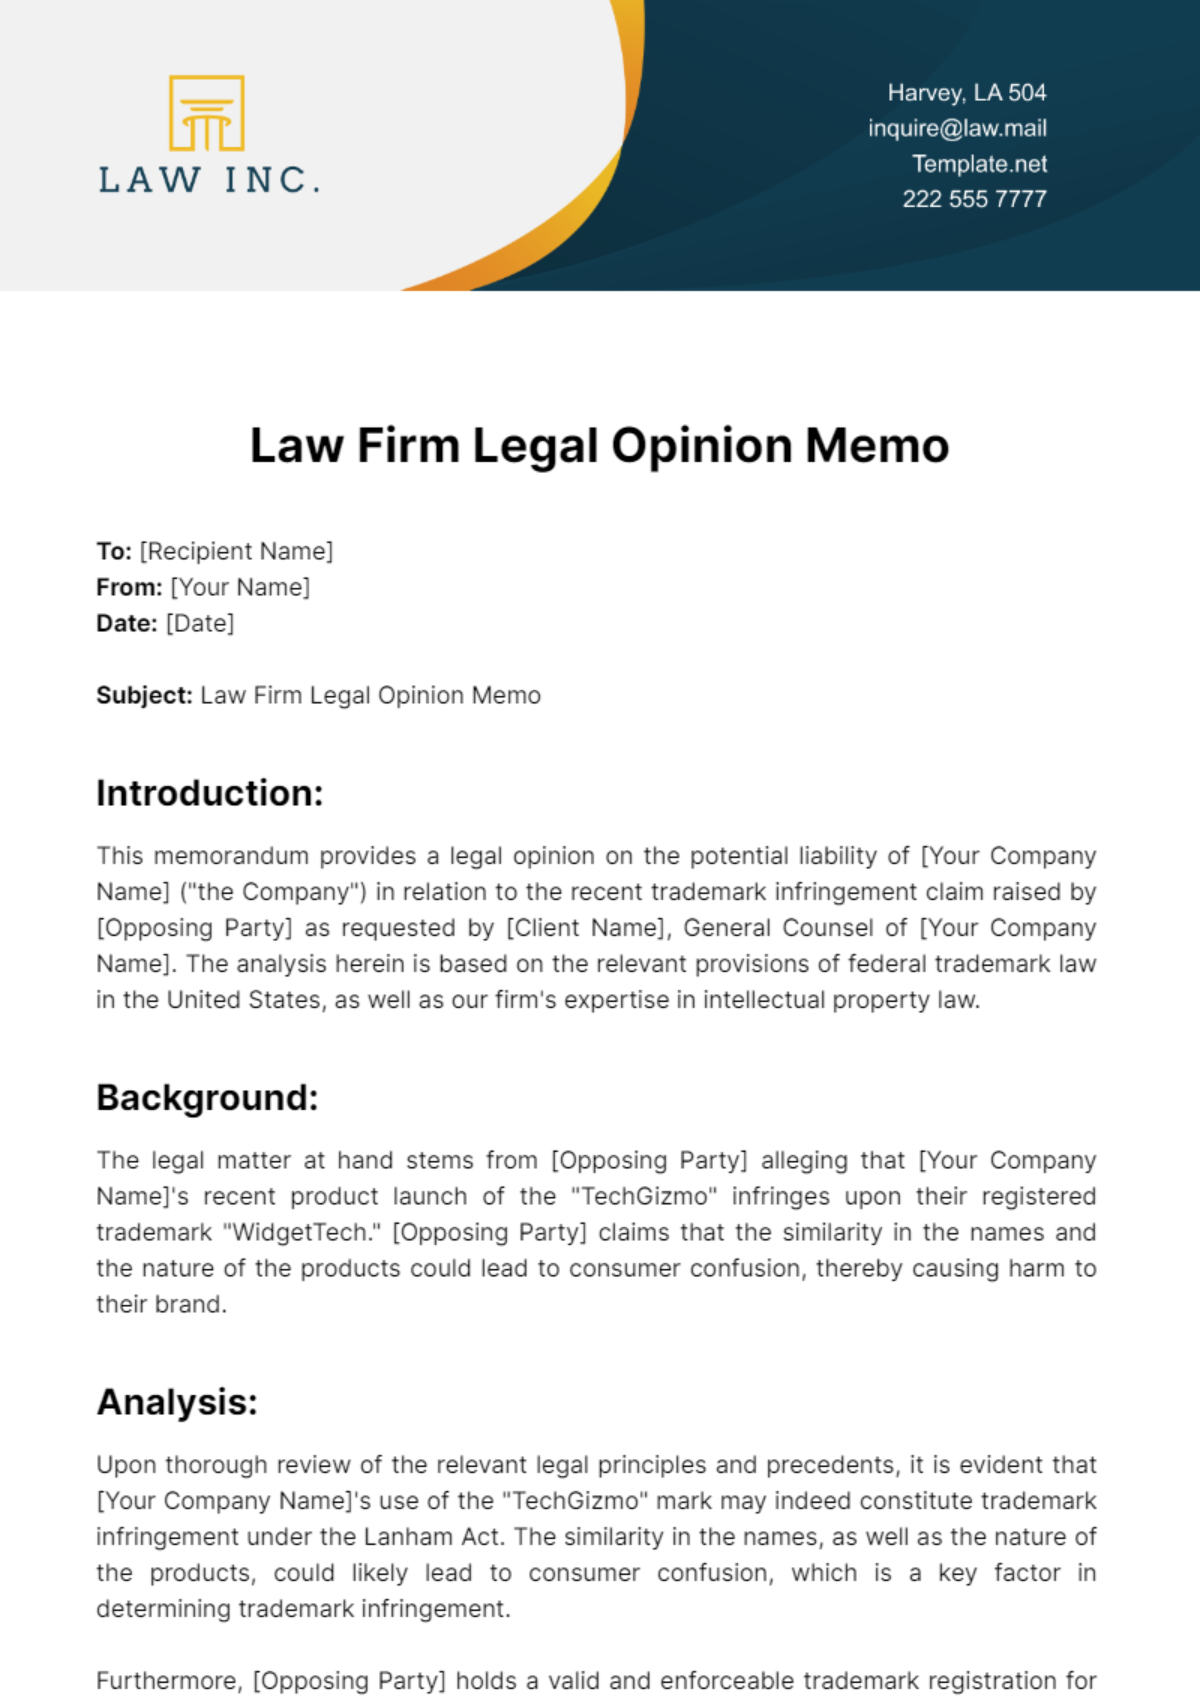 Free Law Firm Legal Opinion Memo Template